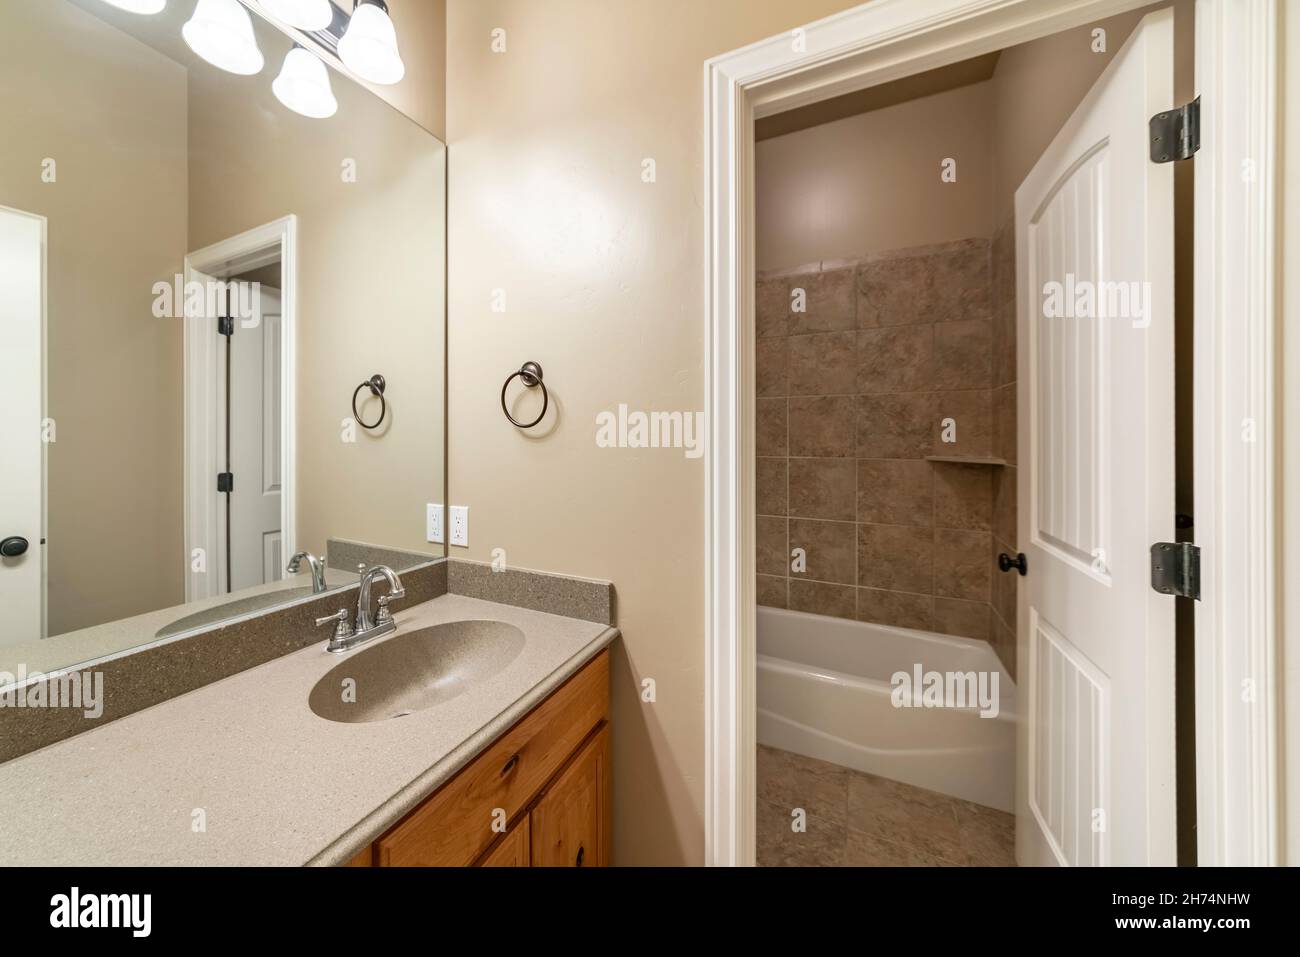 Bathroom interior with white doors and bathtub room with brown tiles corner  shelf and surround. There is a vanity sink with gray granite top and mirro  Stock Photo - Alamy